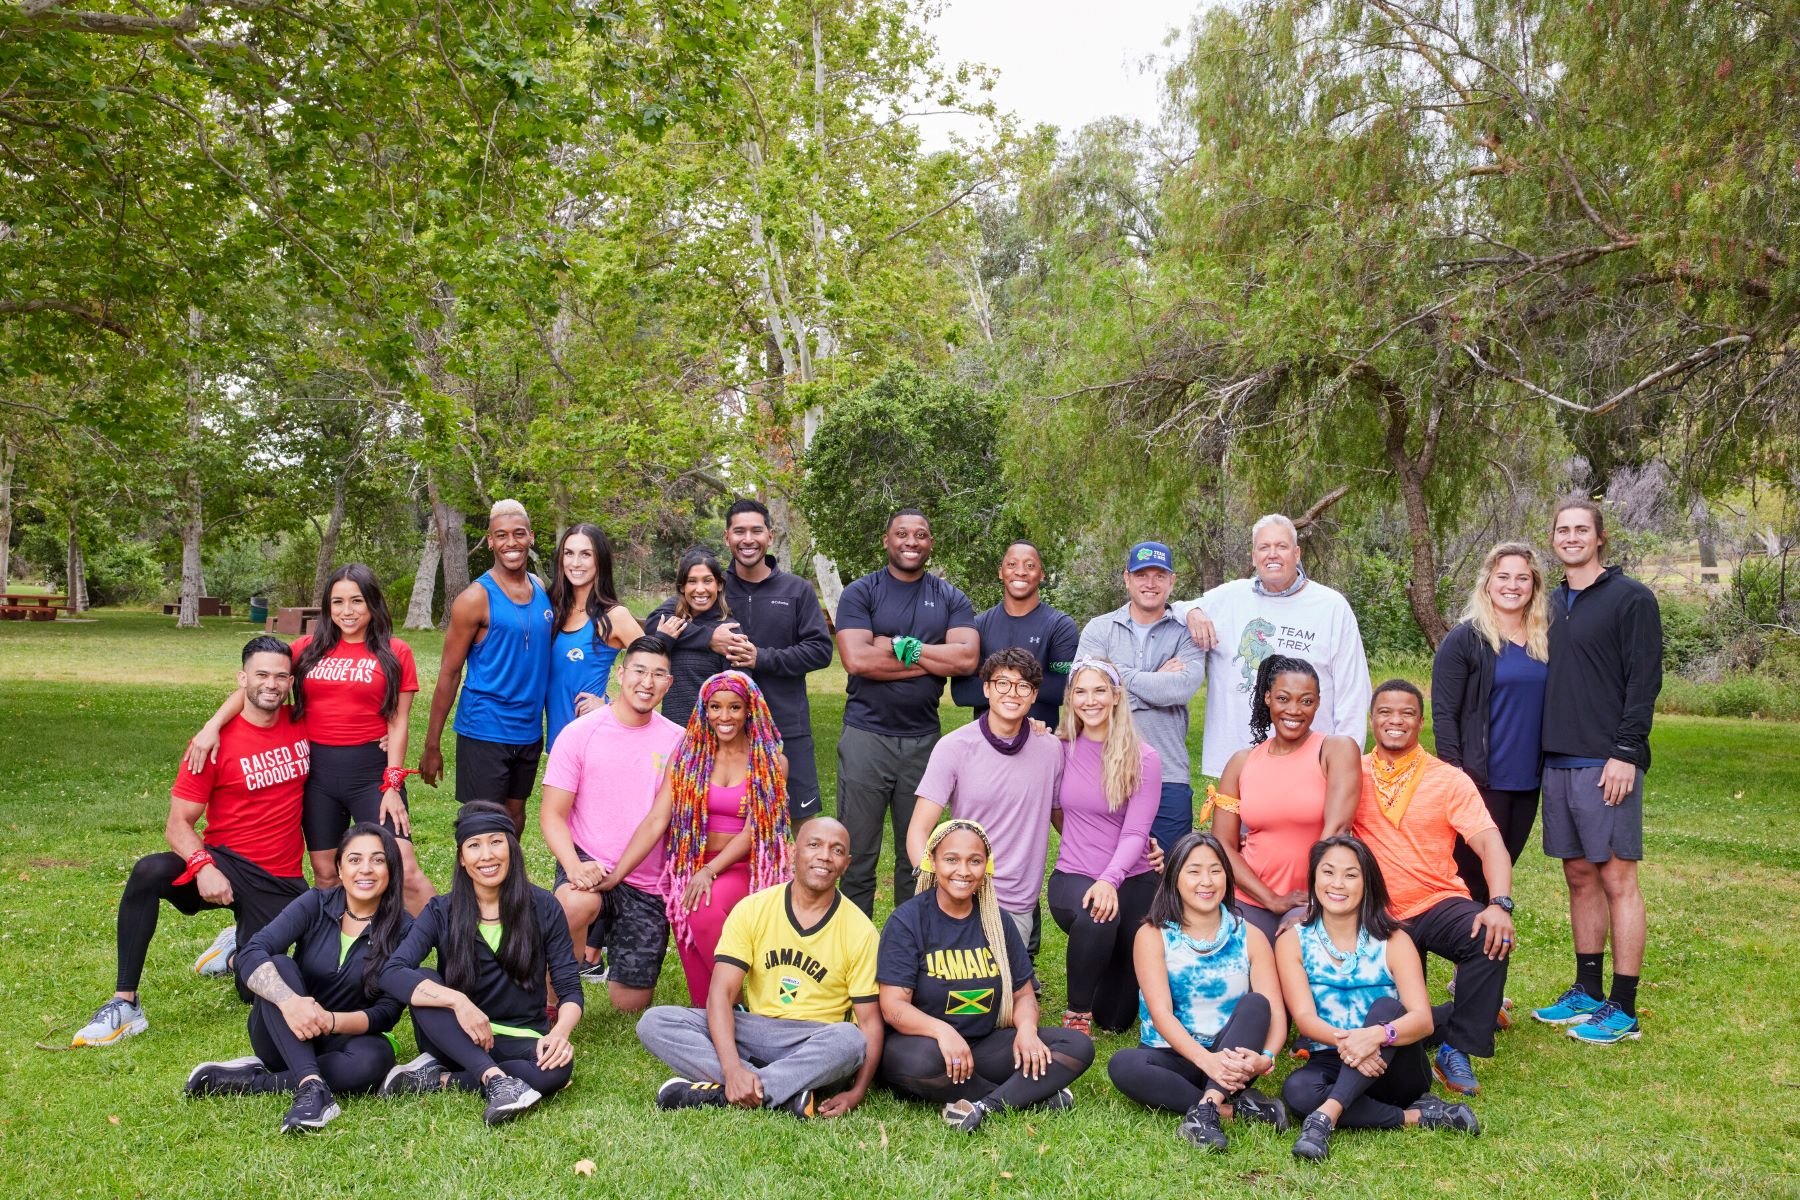 'The Amazing Race' Season 34 cast poses for a group picture in a park.